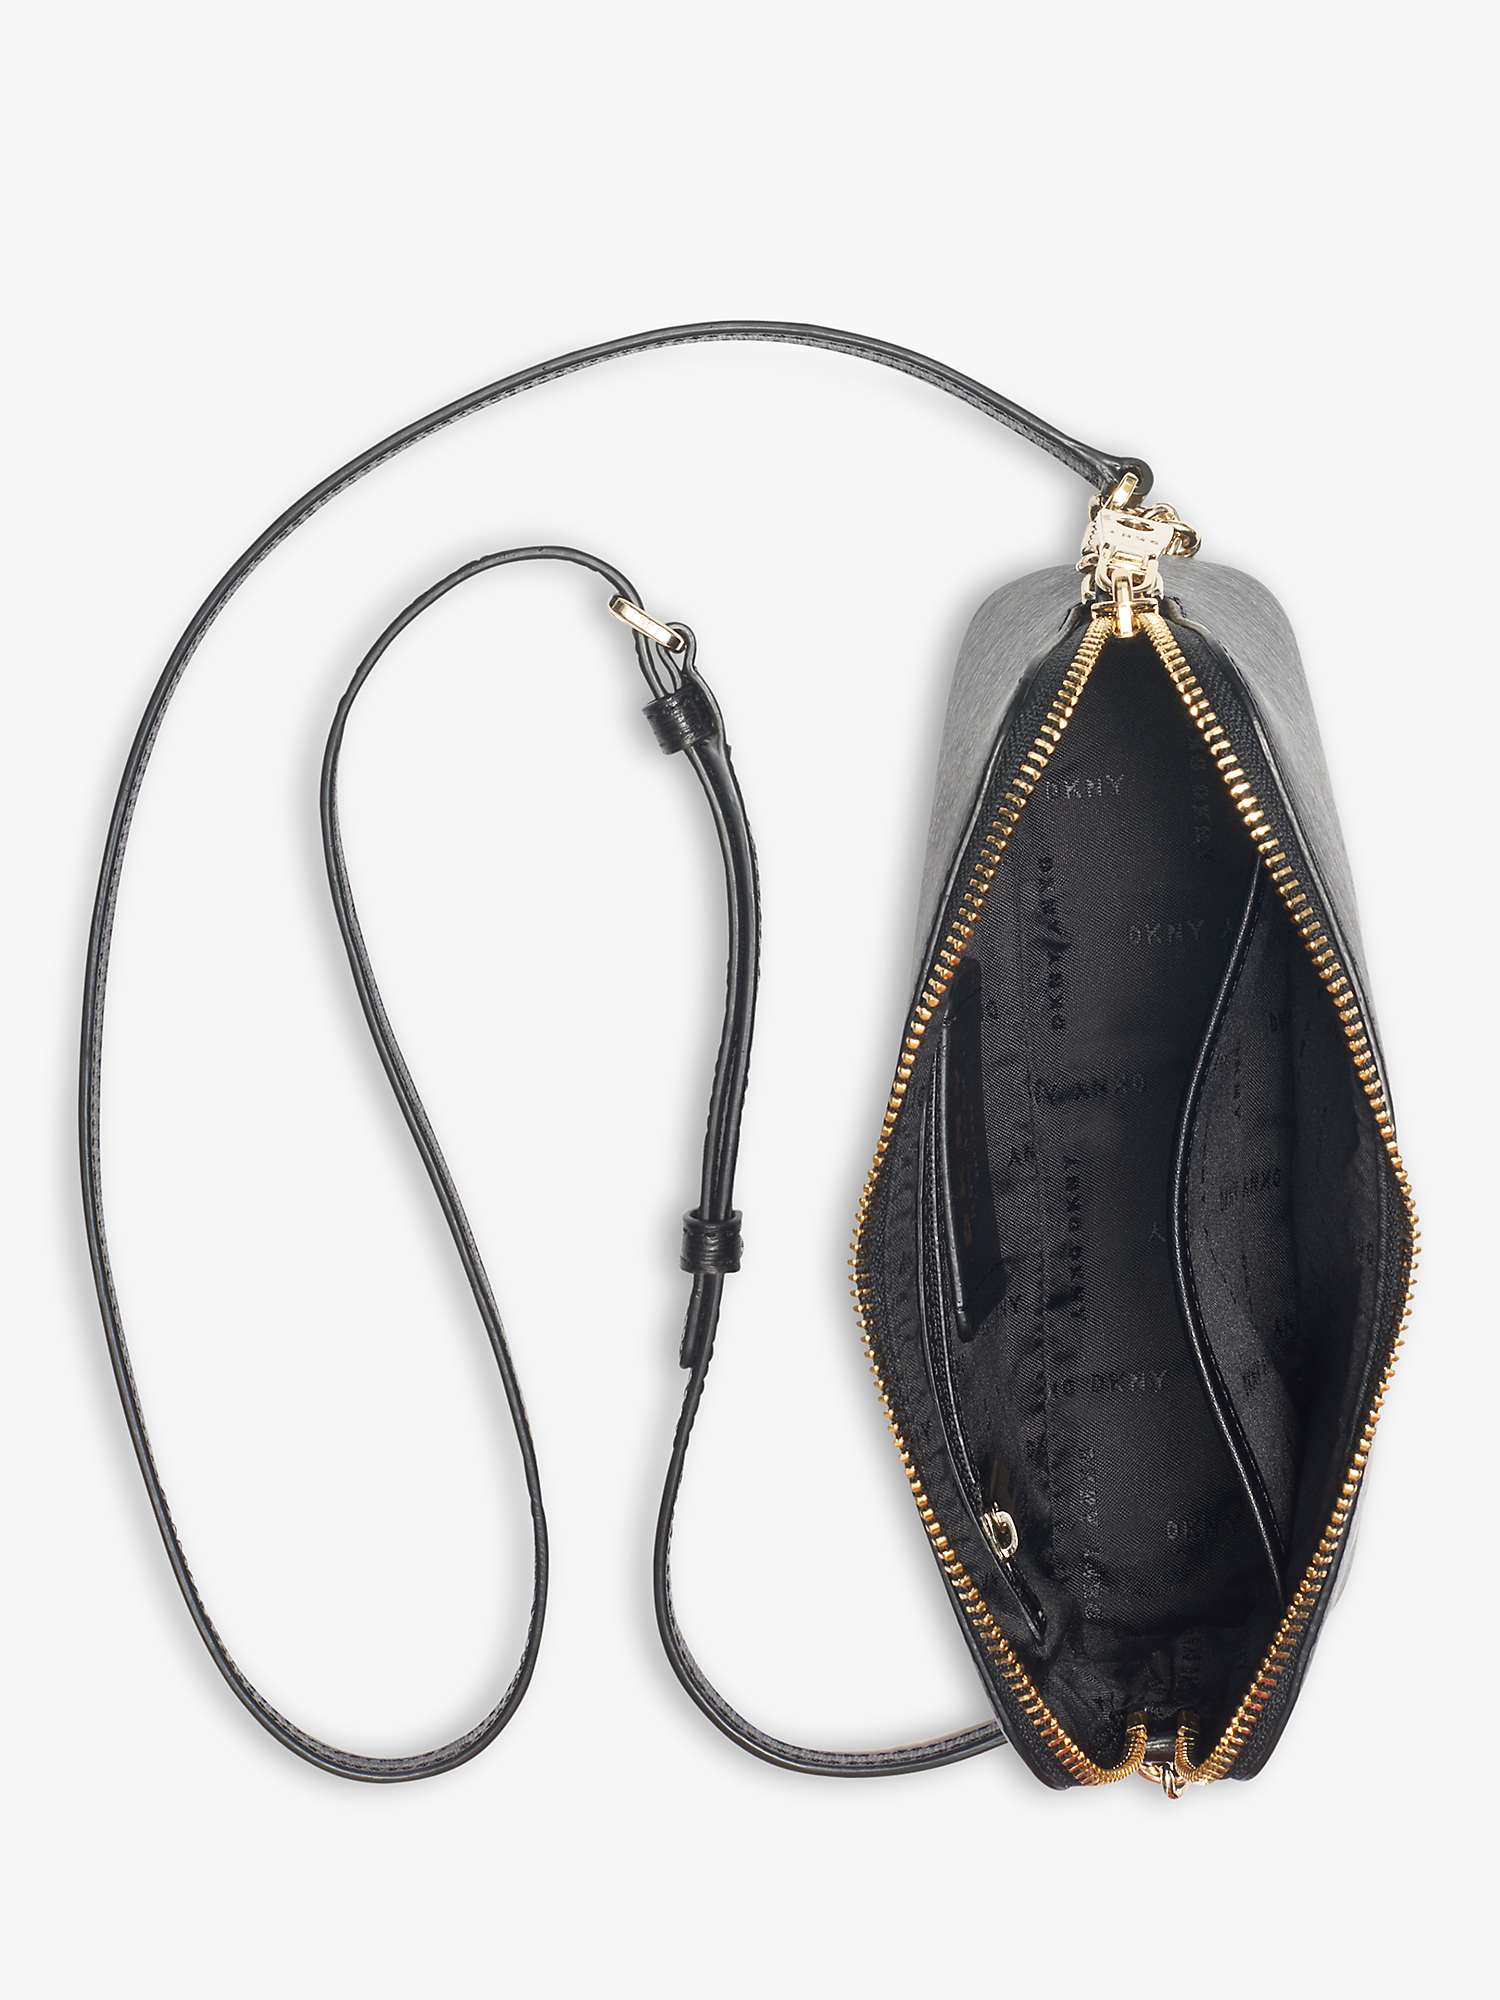 Buy DKNY Bryant Dome Leather Cross Body Bag Online at johnlewis.com